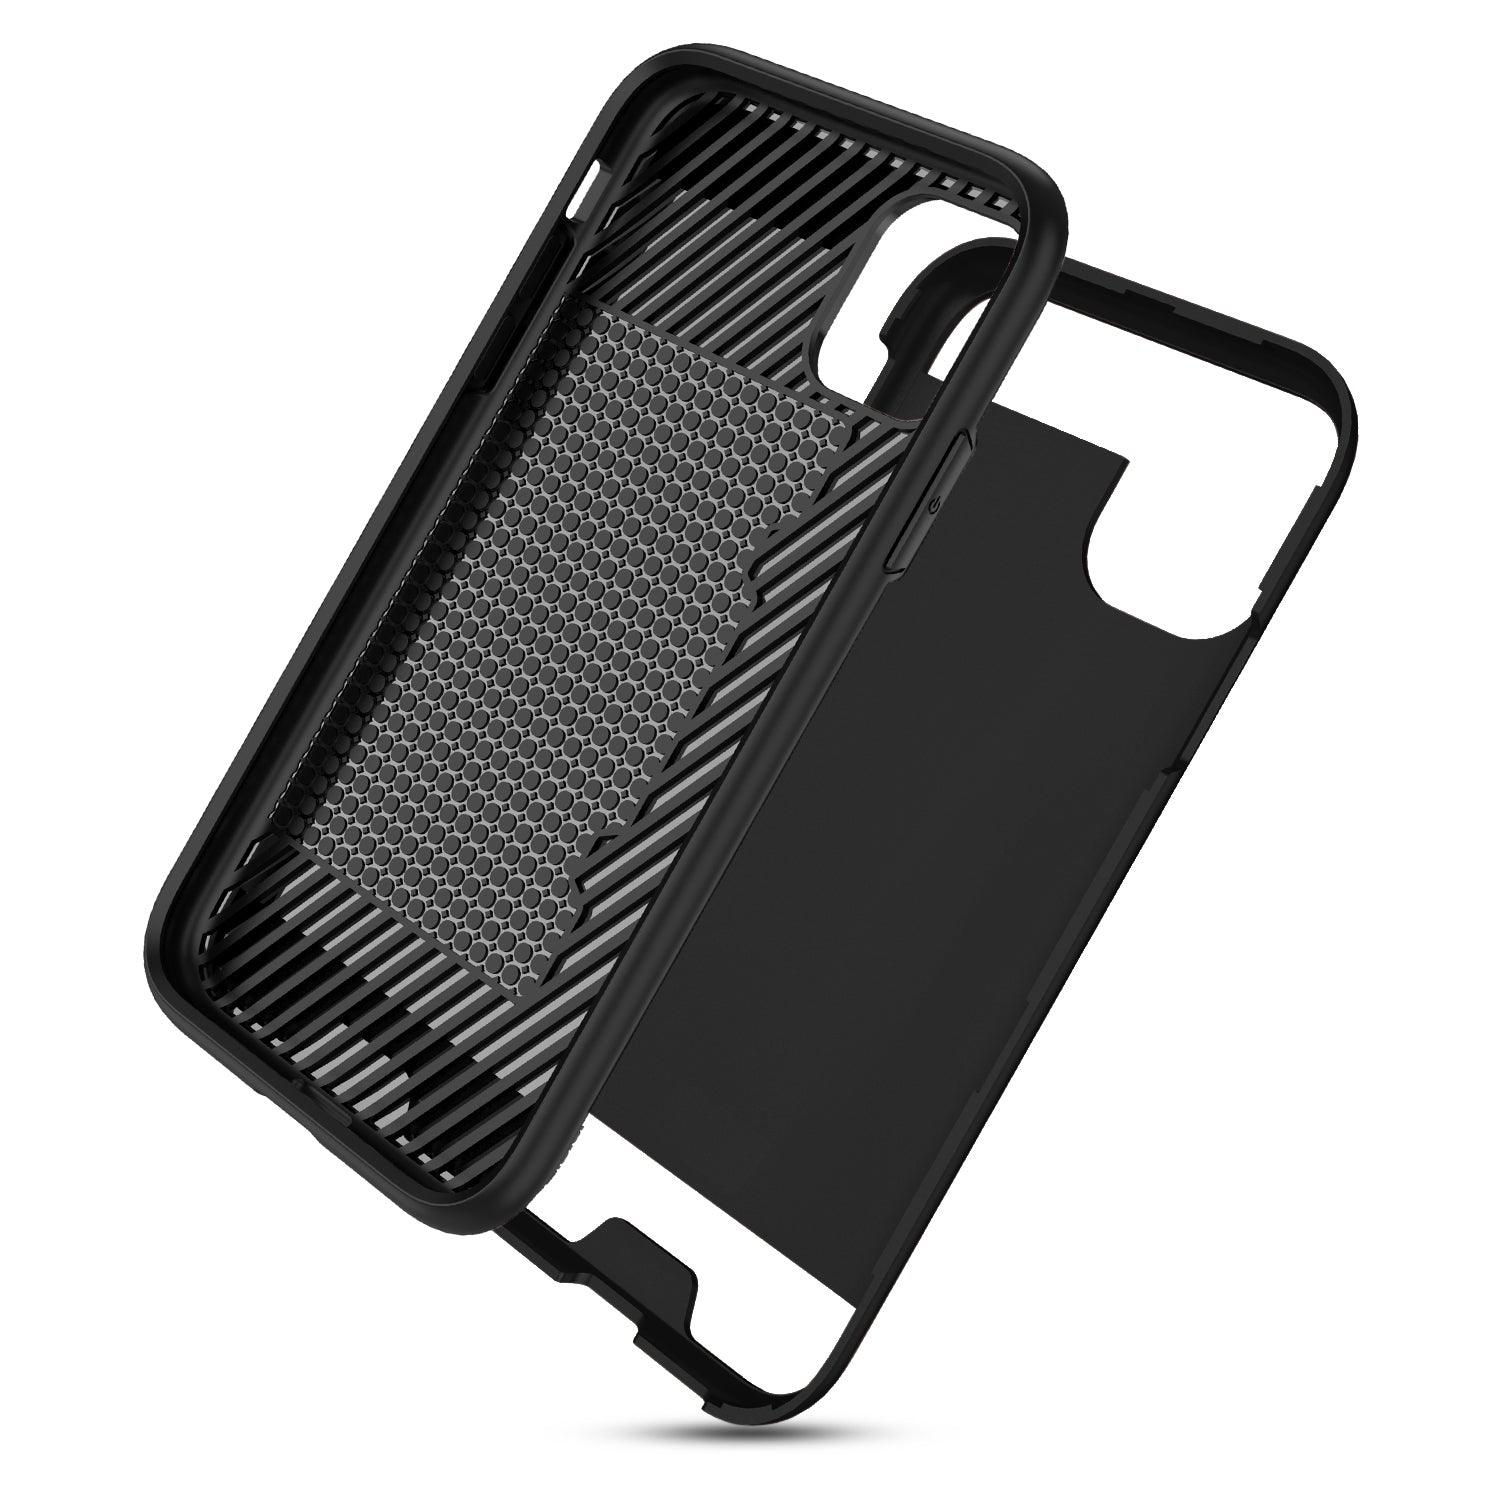 Case Hybrid Slim Armor With Card Holder iPhone 11 Pro Max Black Color